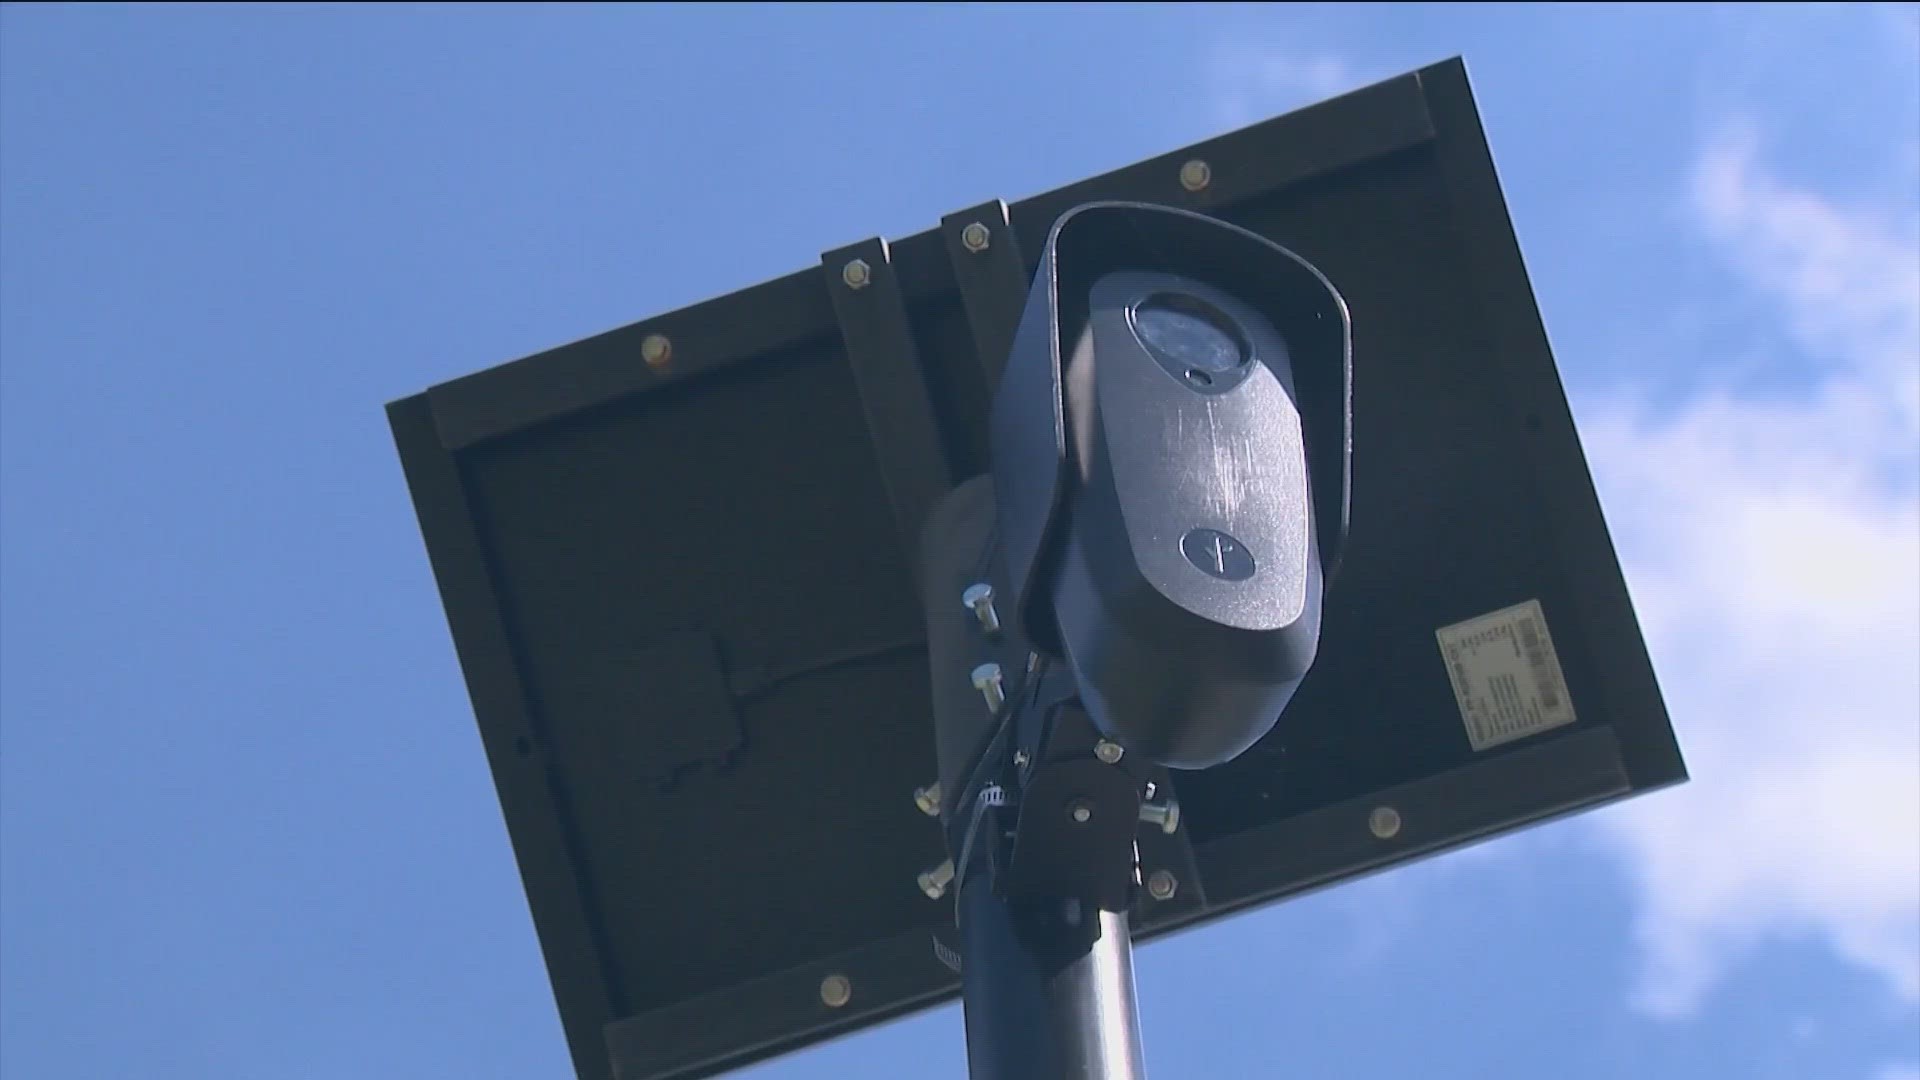 Leaders in Kyle say they want to be transparent about where these cameras are.